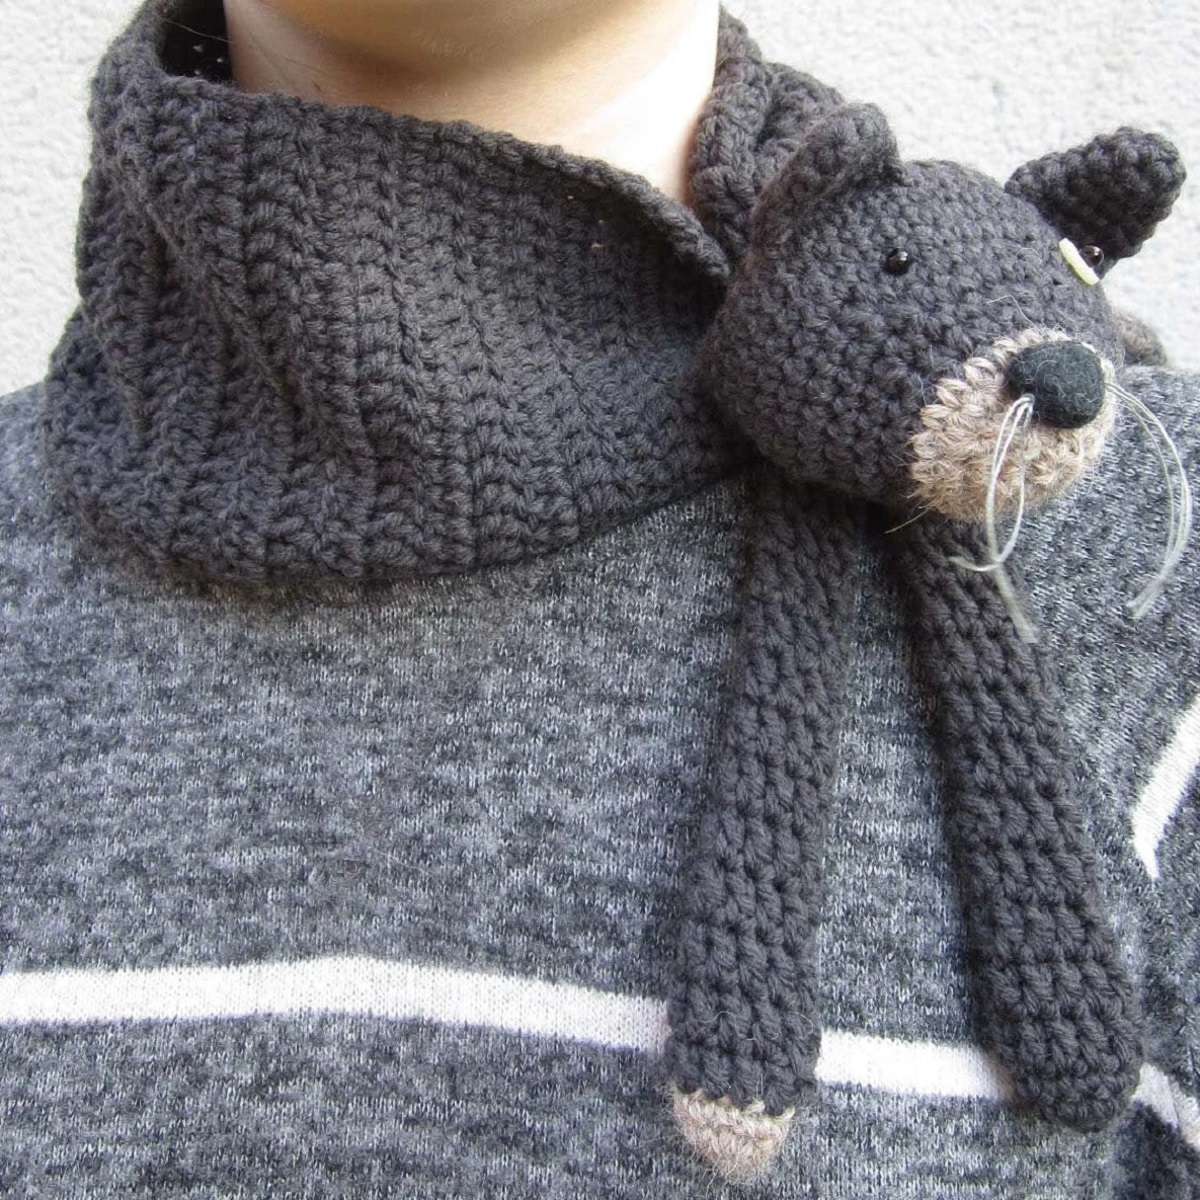 A woman wearing a crochet scarf with a stuffed black cat’s face and front legs attached to the right side.